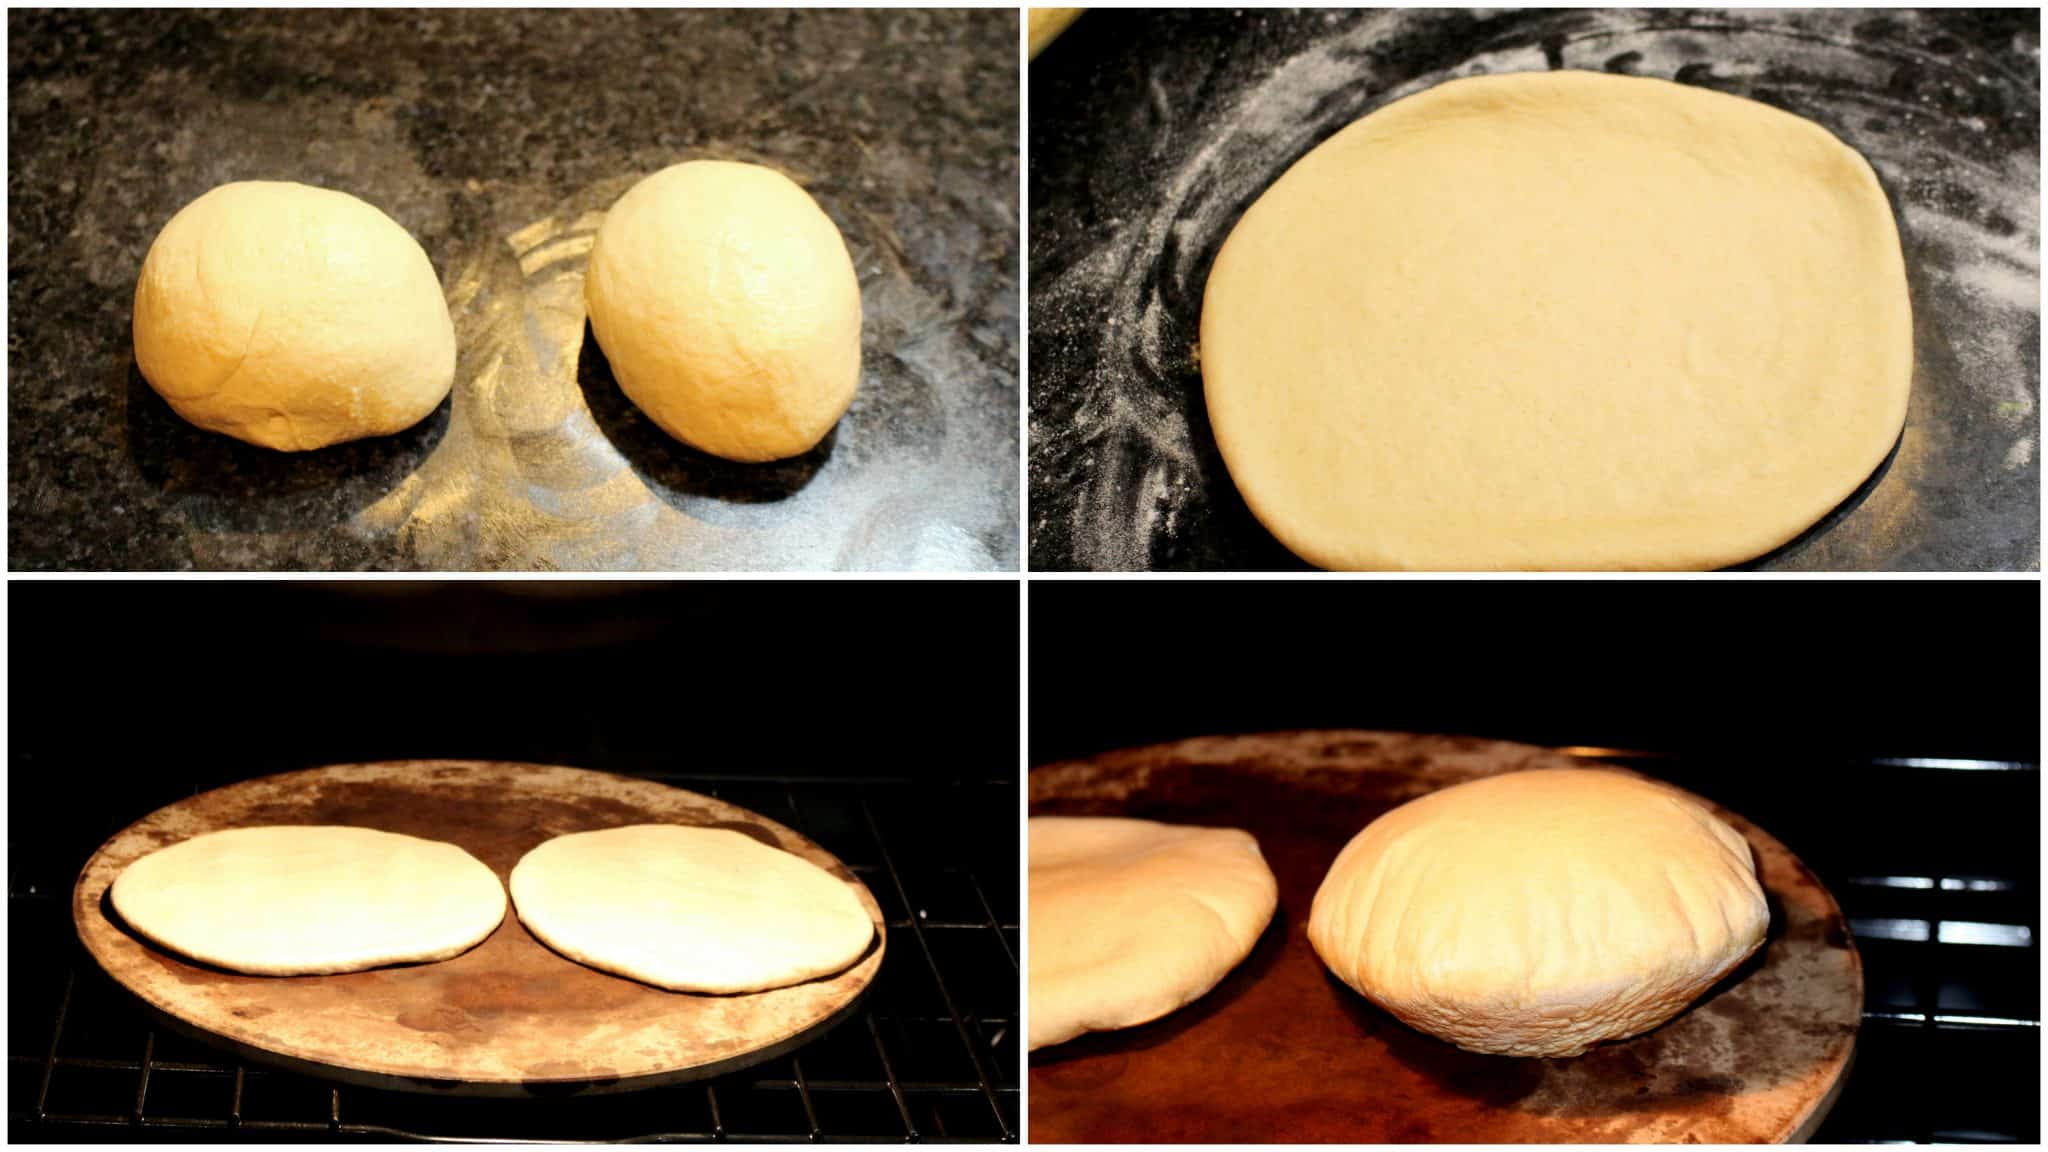 Dough being prepared, rolled and baked for pita bread.